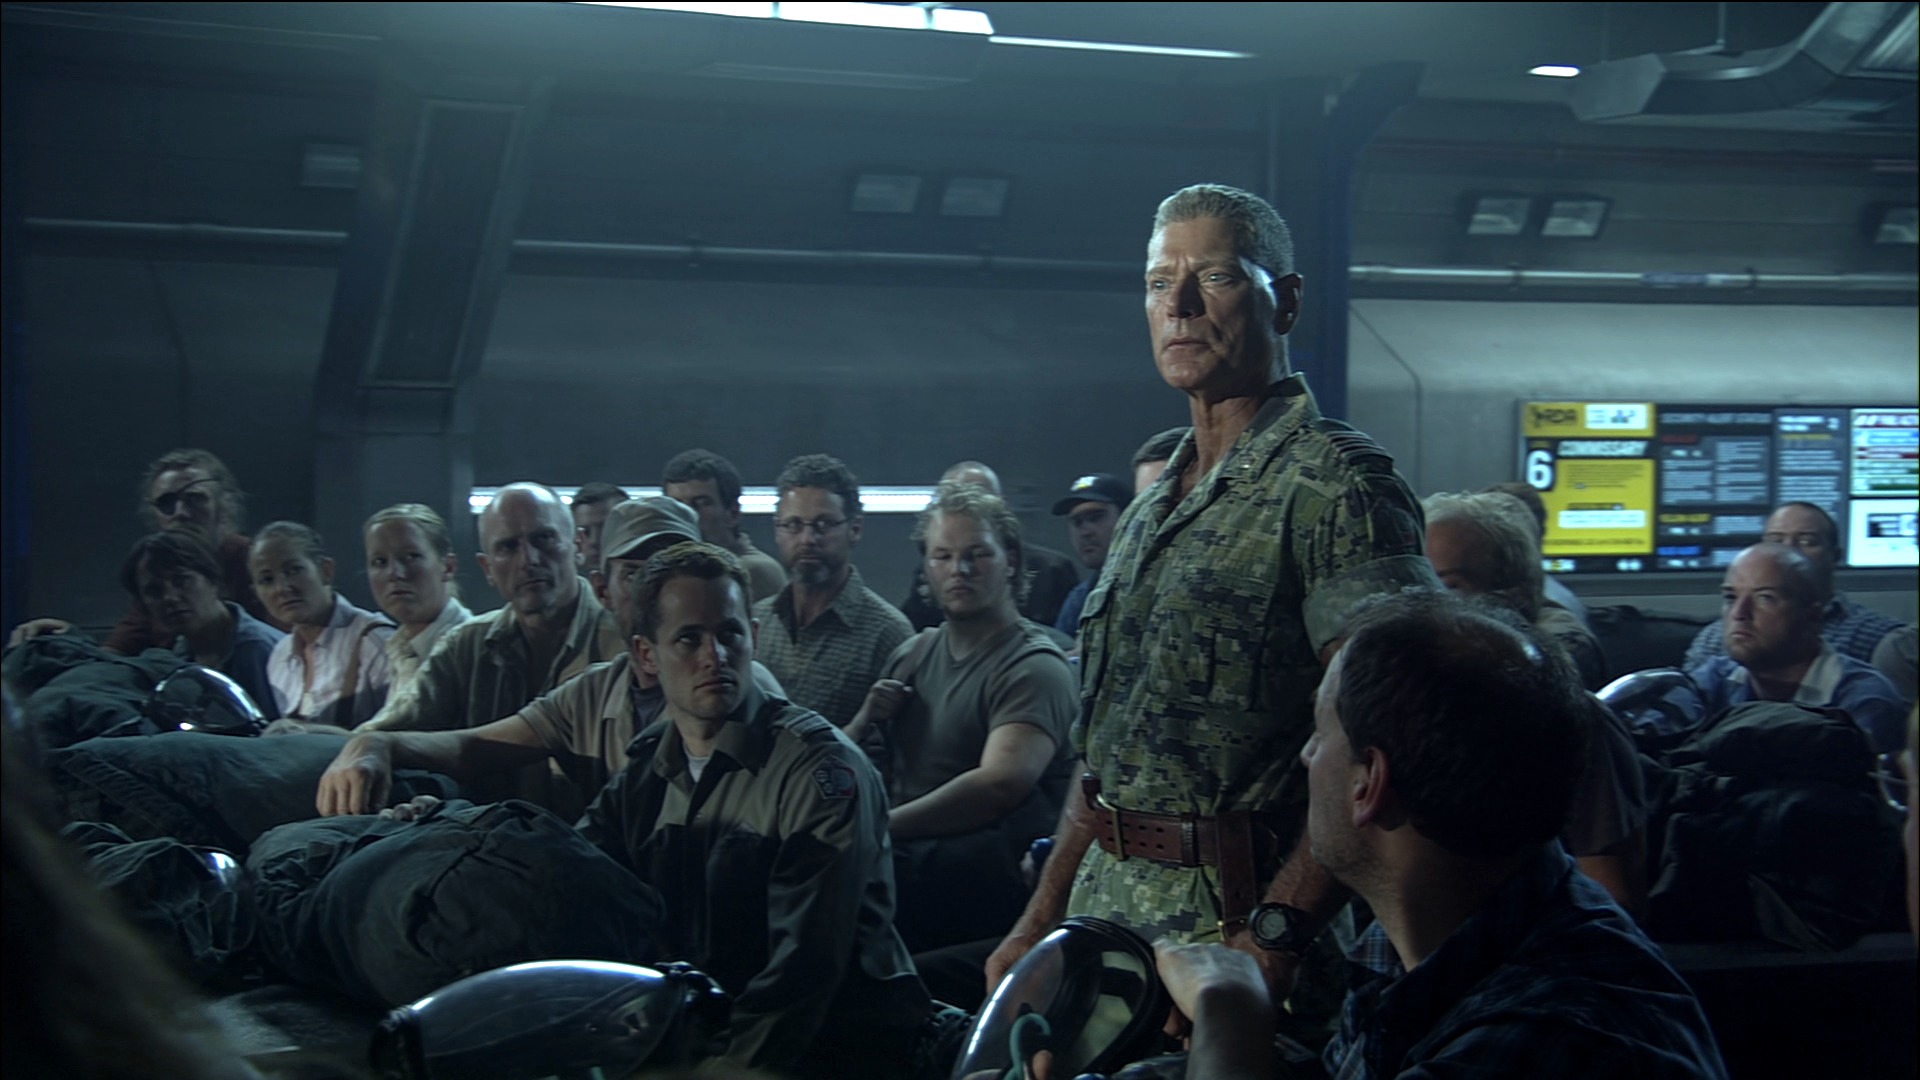 Colonel Quaritch rallying the troops. Avatar movie, Avatar, Movie scenes